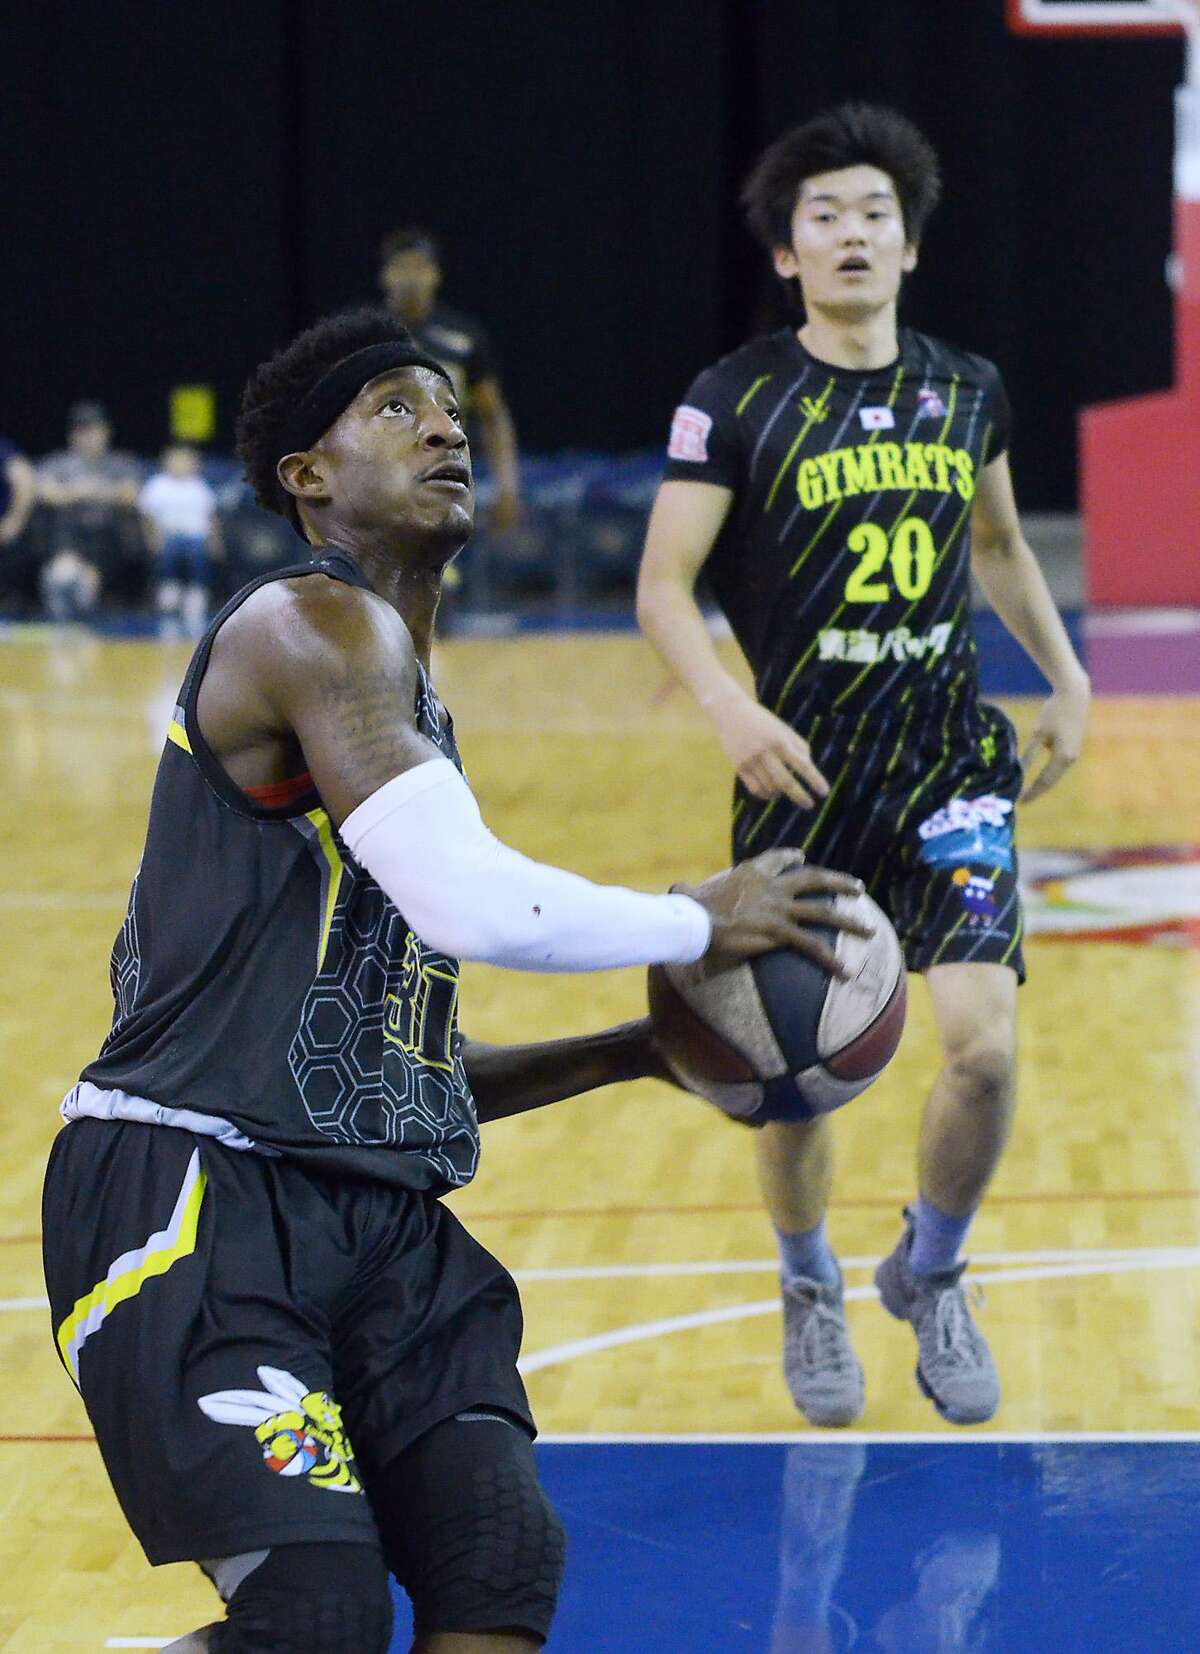 Point guard Anthony Alston had 17 points, five rebounds and four assists as the Swarm won 146-85 Thursday over Shizouka.